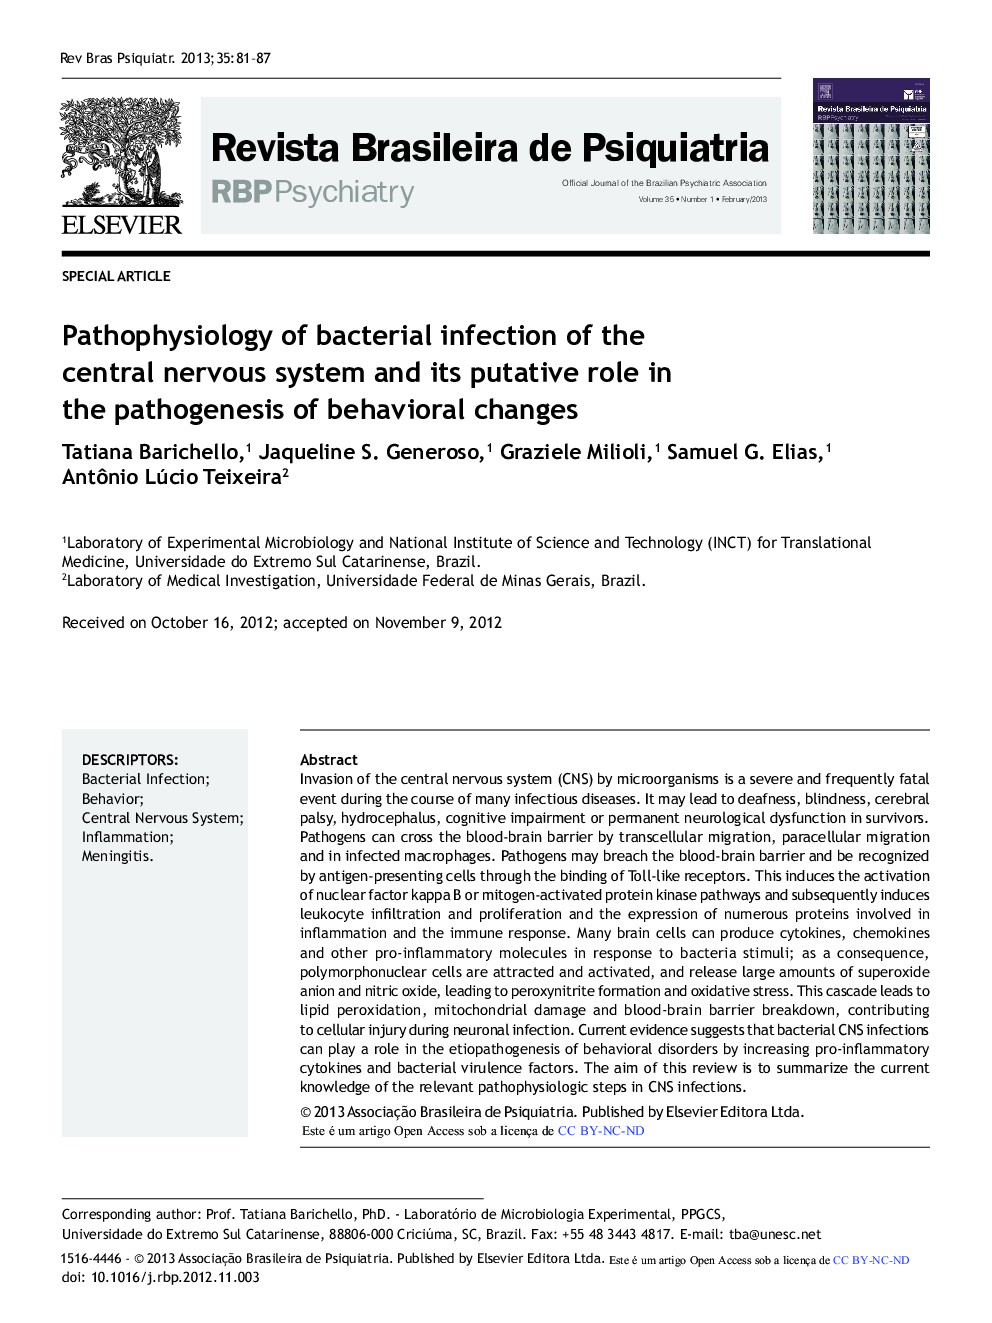 Pathophysiology of Bacterial Infection of the Central Nervous System and its Putative Role in the Pathogenesis of Behavioral Changes